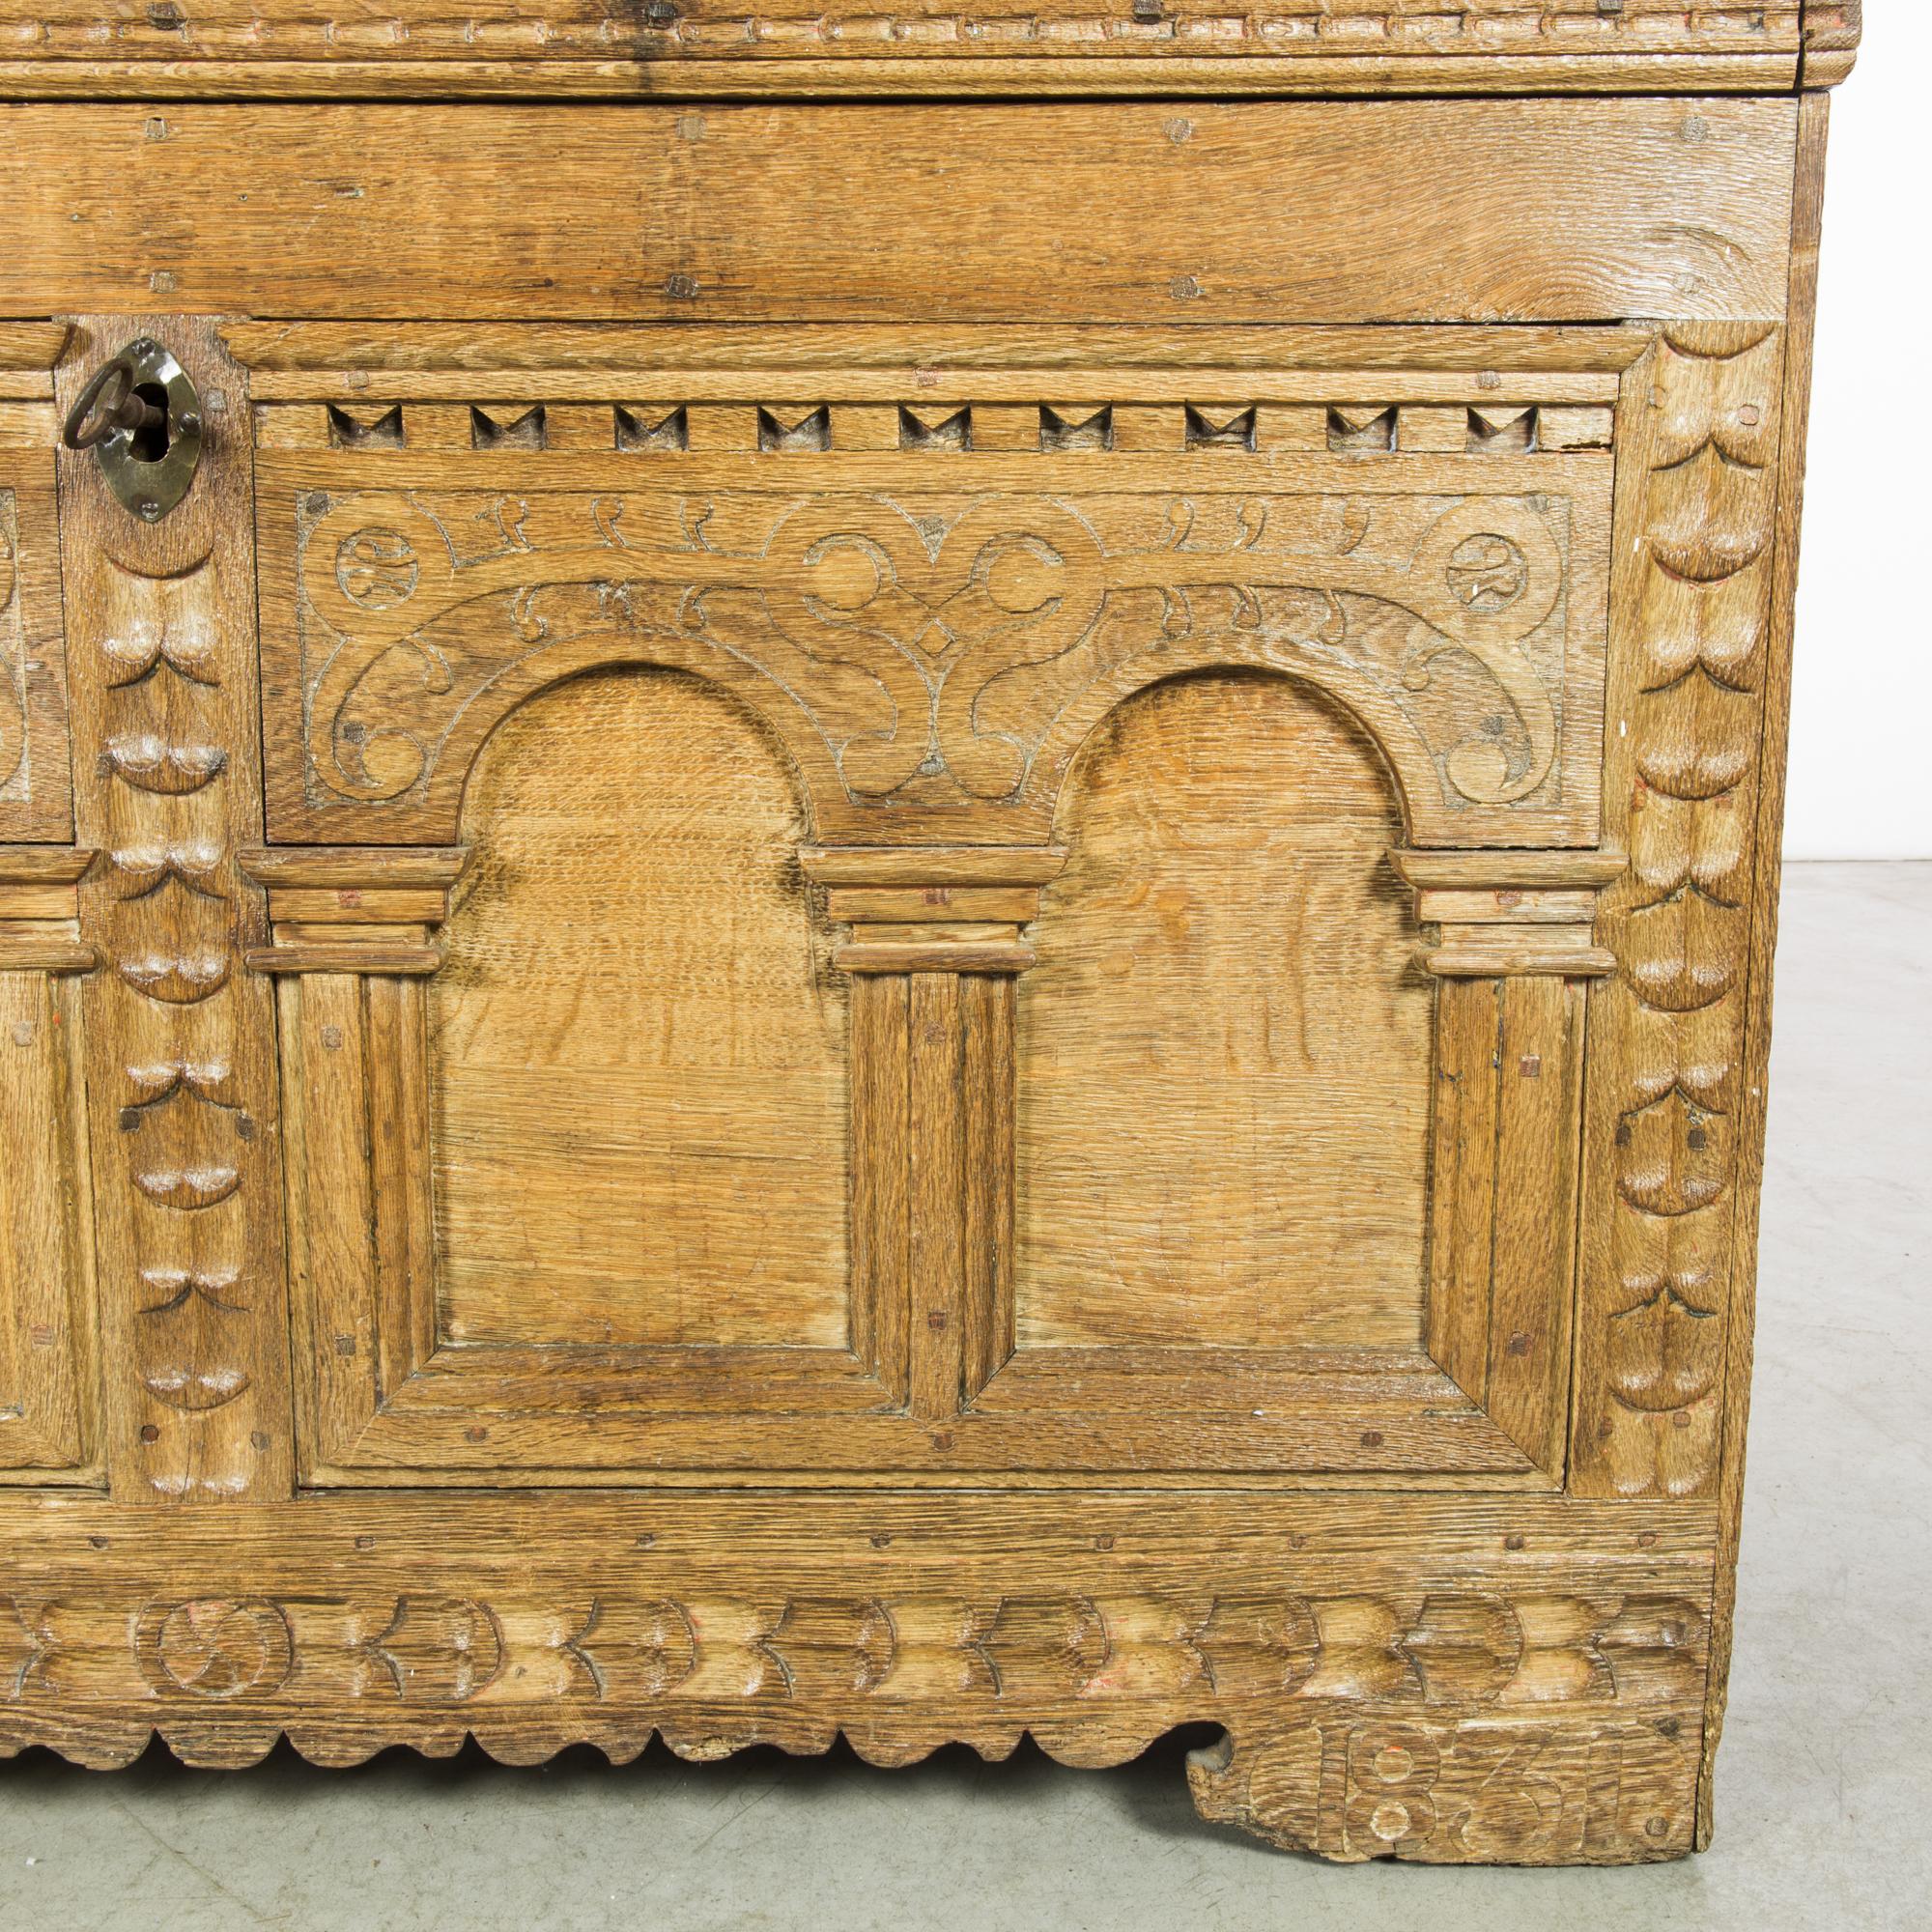 Behold the exquisite craftsmanship of this 1831 Belgian wooden trunk, adorned with its original patina that whispers the tales of time. The frieze, graced with classical arches, unveils intricate hand-carving, a testament to the artisan's dedication